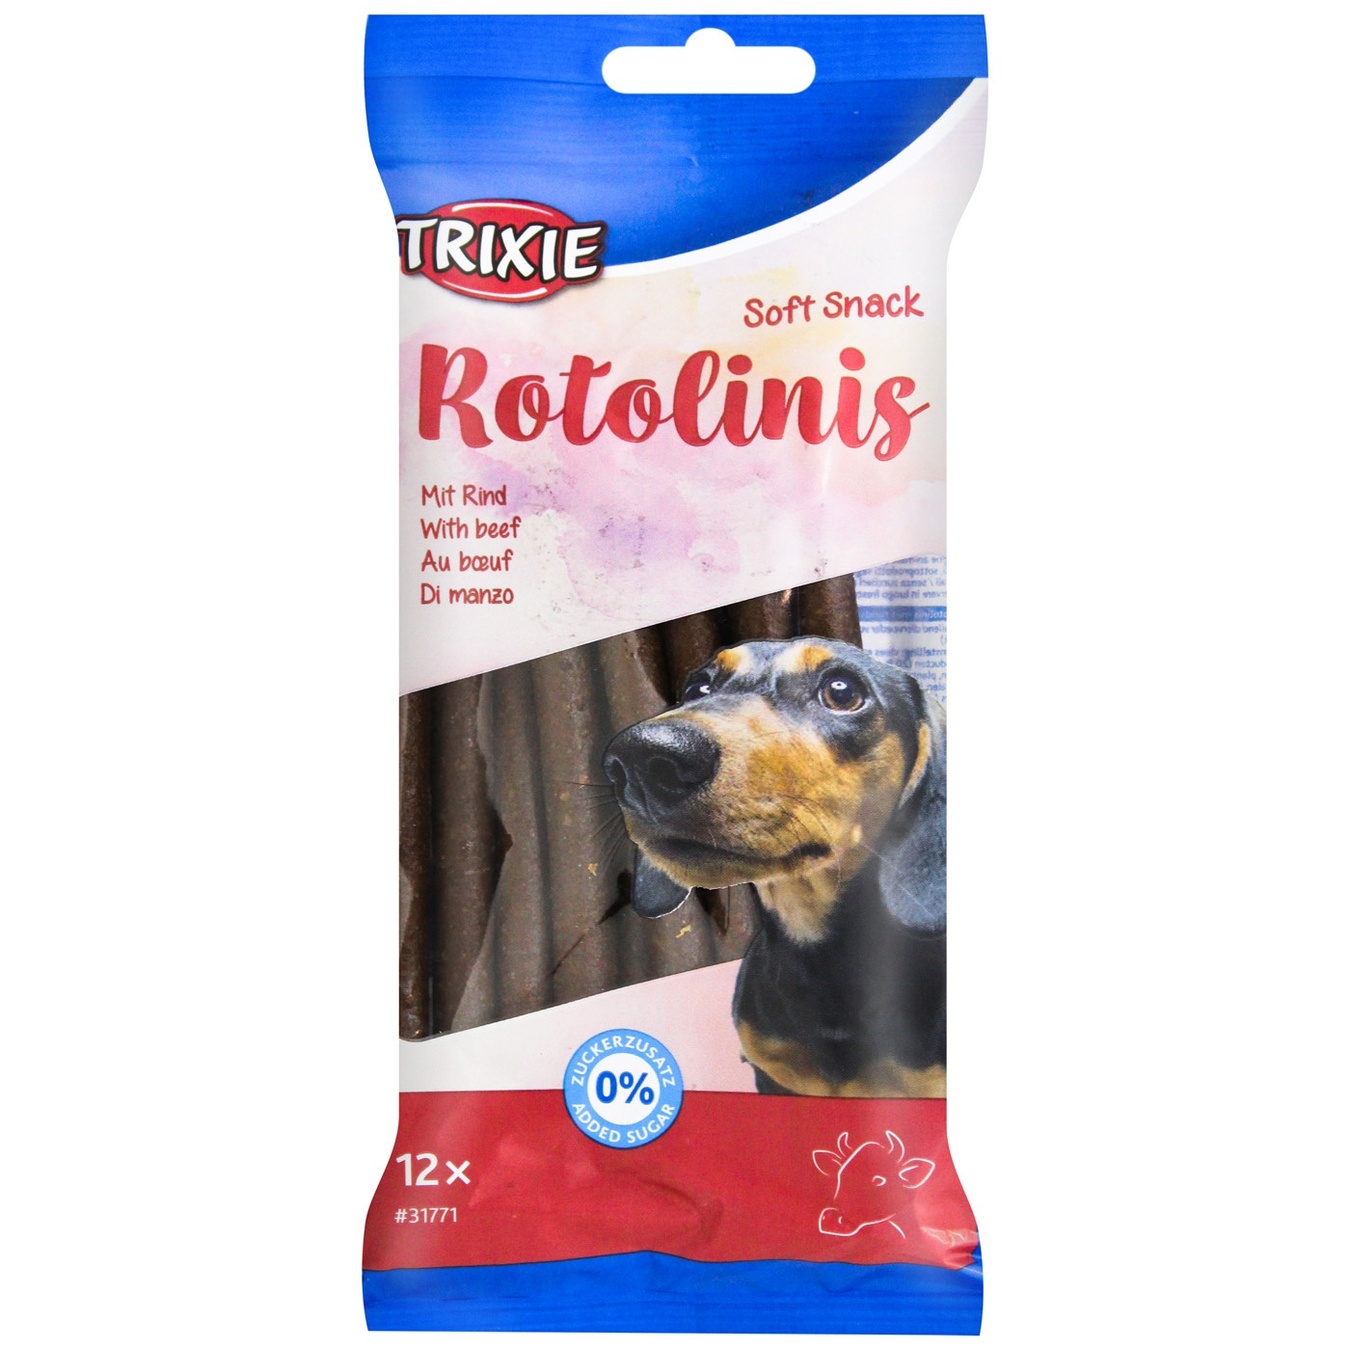 Treats Trixie Soft Snack Rotolinis with beef for dogs 120g